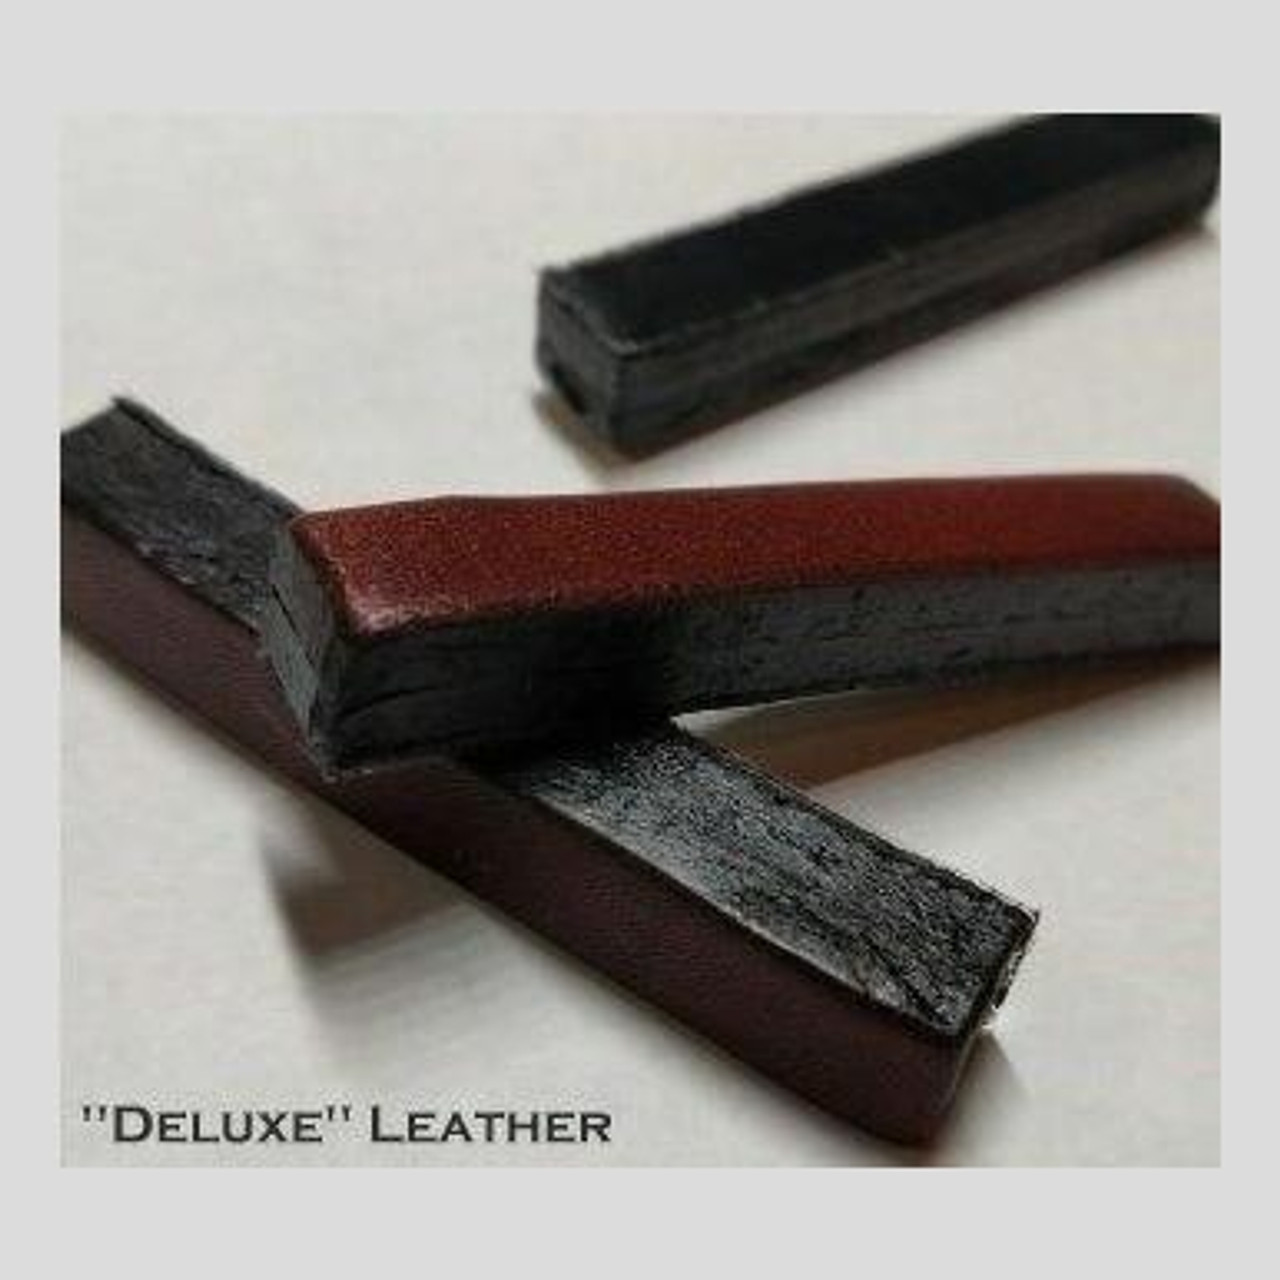 Match 'n Patch Self-Adhesive Leather Repair Tape, 3 inch x 72 inch (Dark Brown)